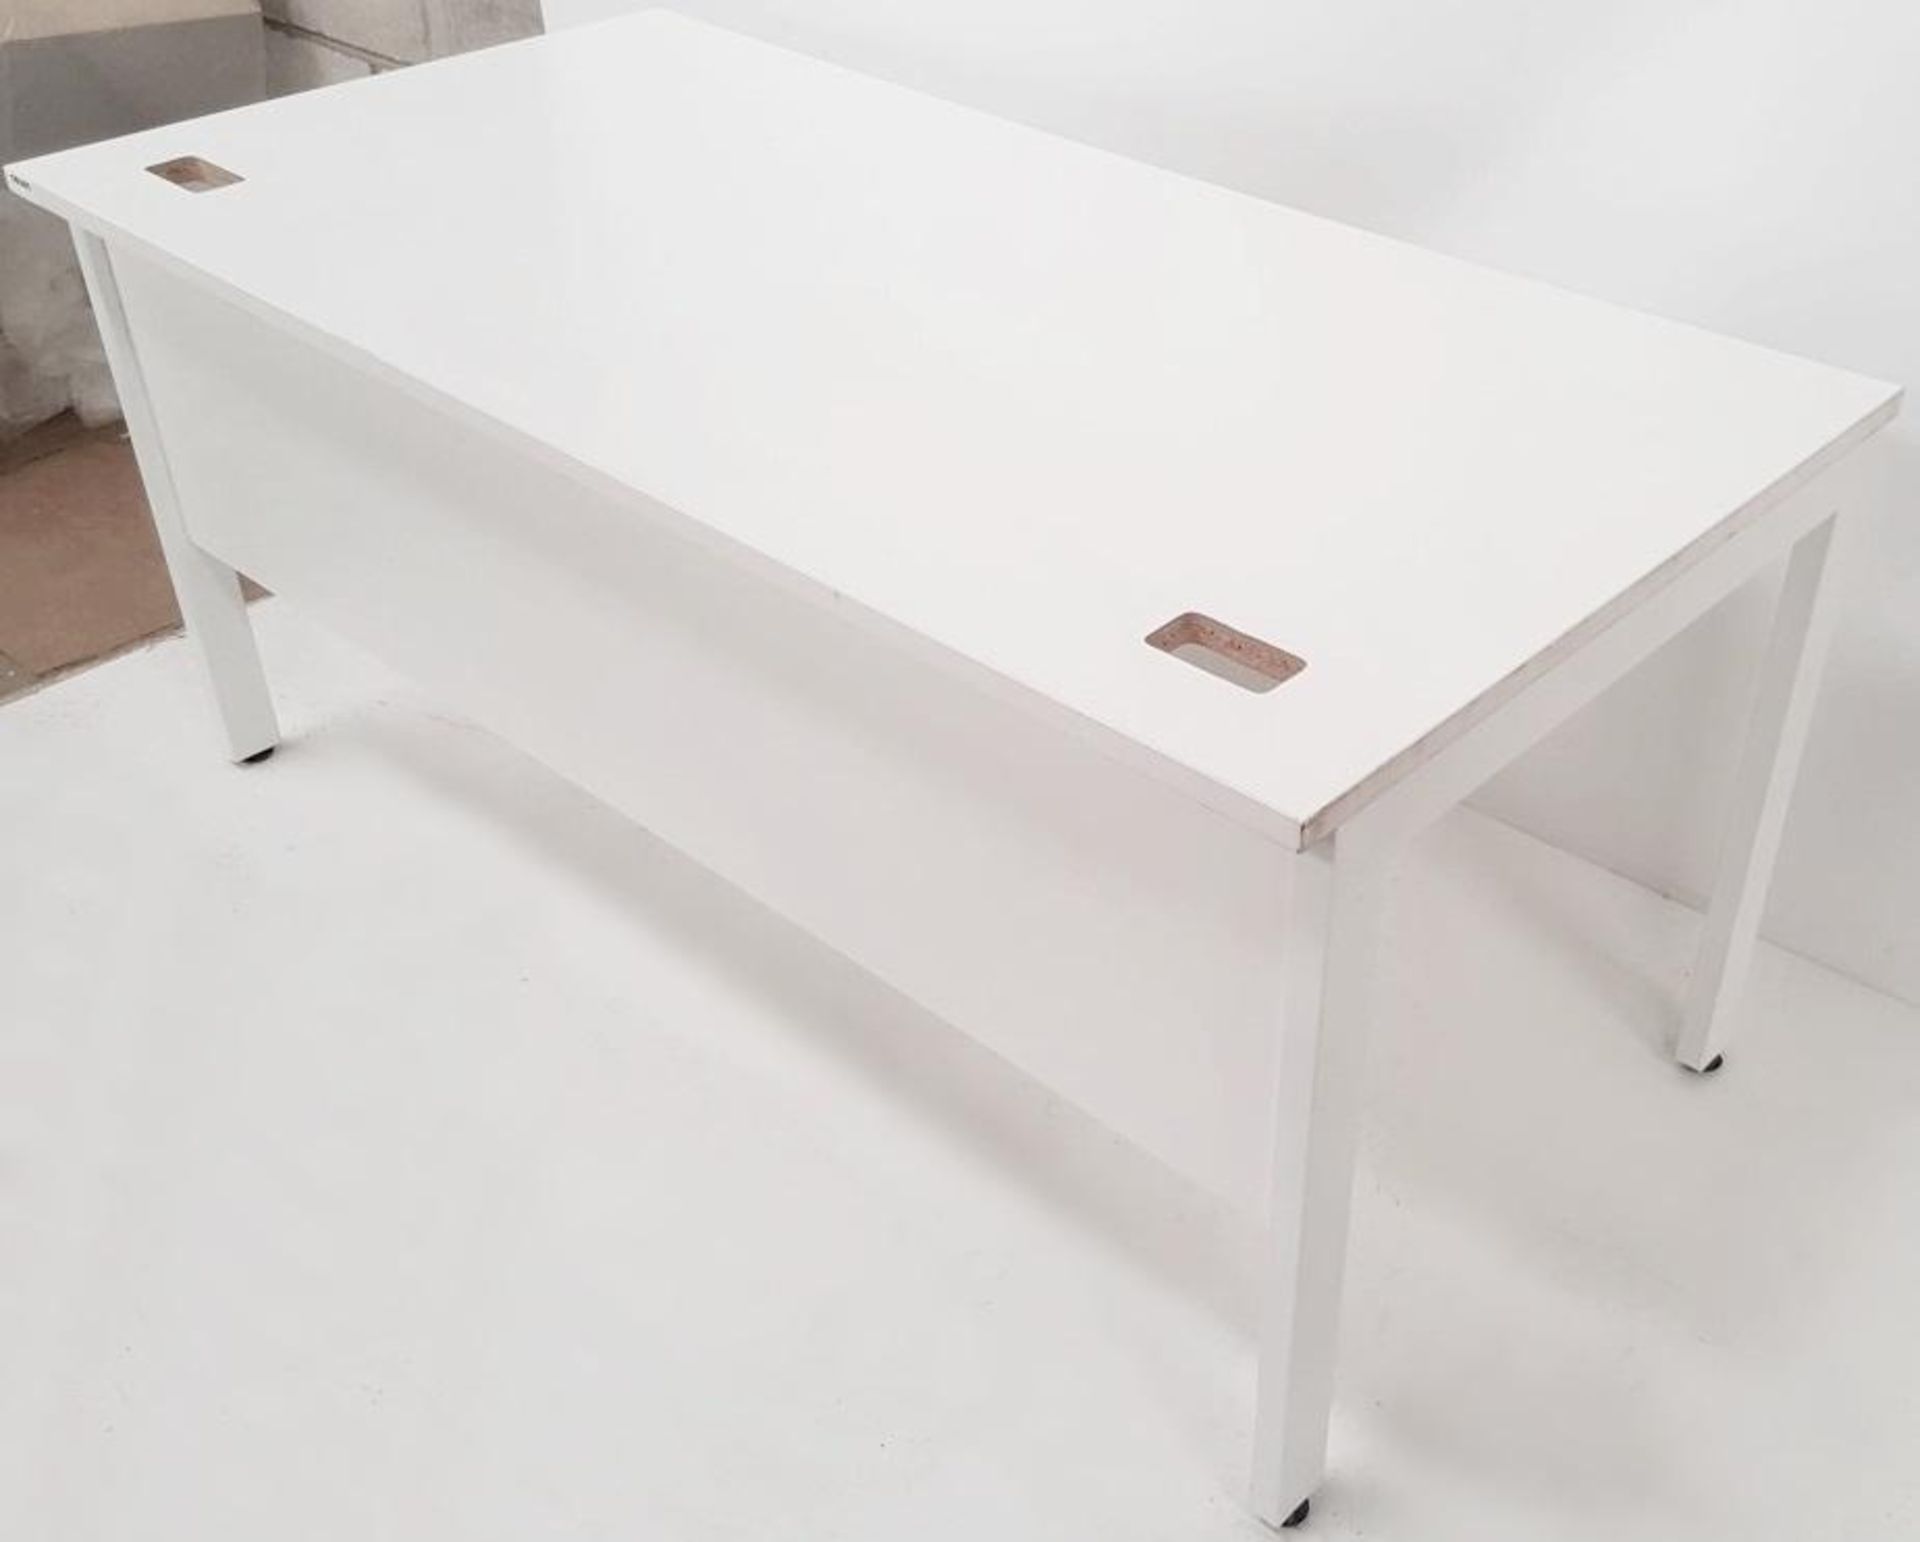 1 x Large Premium Office Desk In White - Used, In Good Condition - Dimensions: W160 x W80 x H74cm -